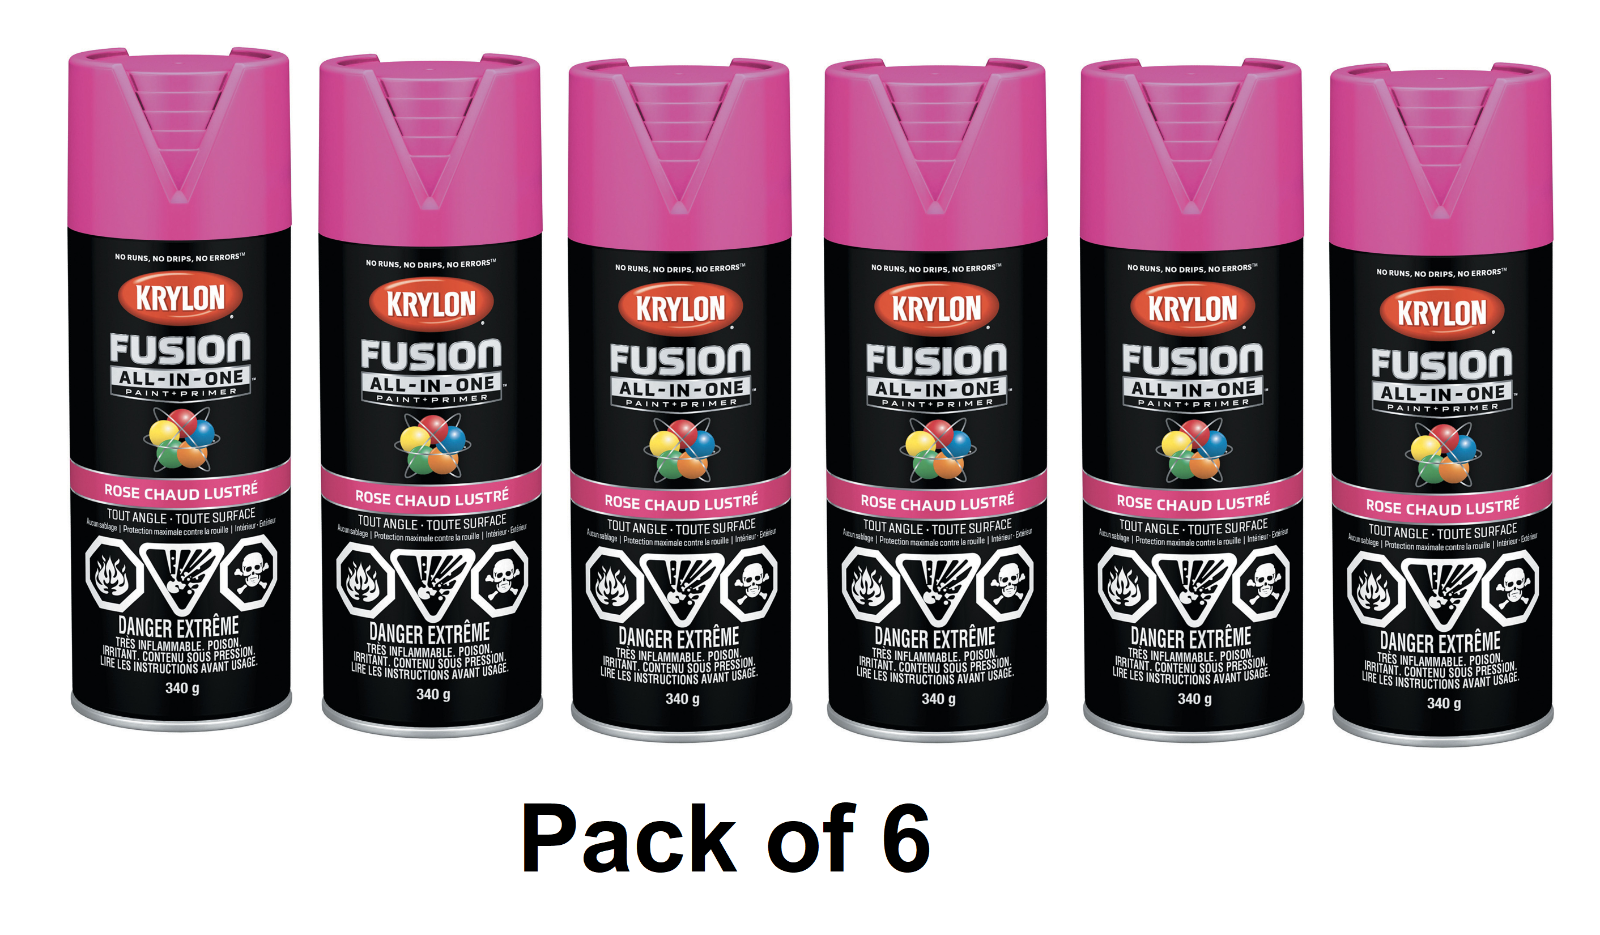 Krylon Fusion All-In-One Gloss Hot Pink Paint+Primer Spray Paint 12 oz